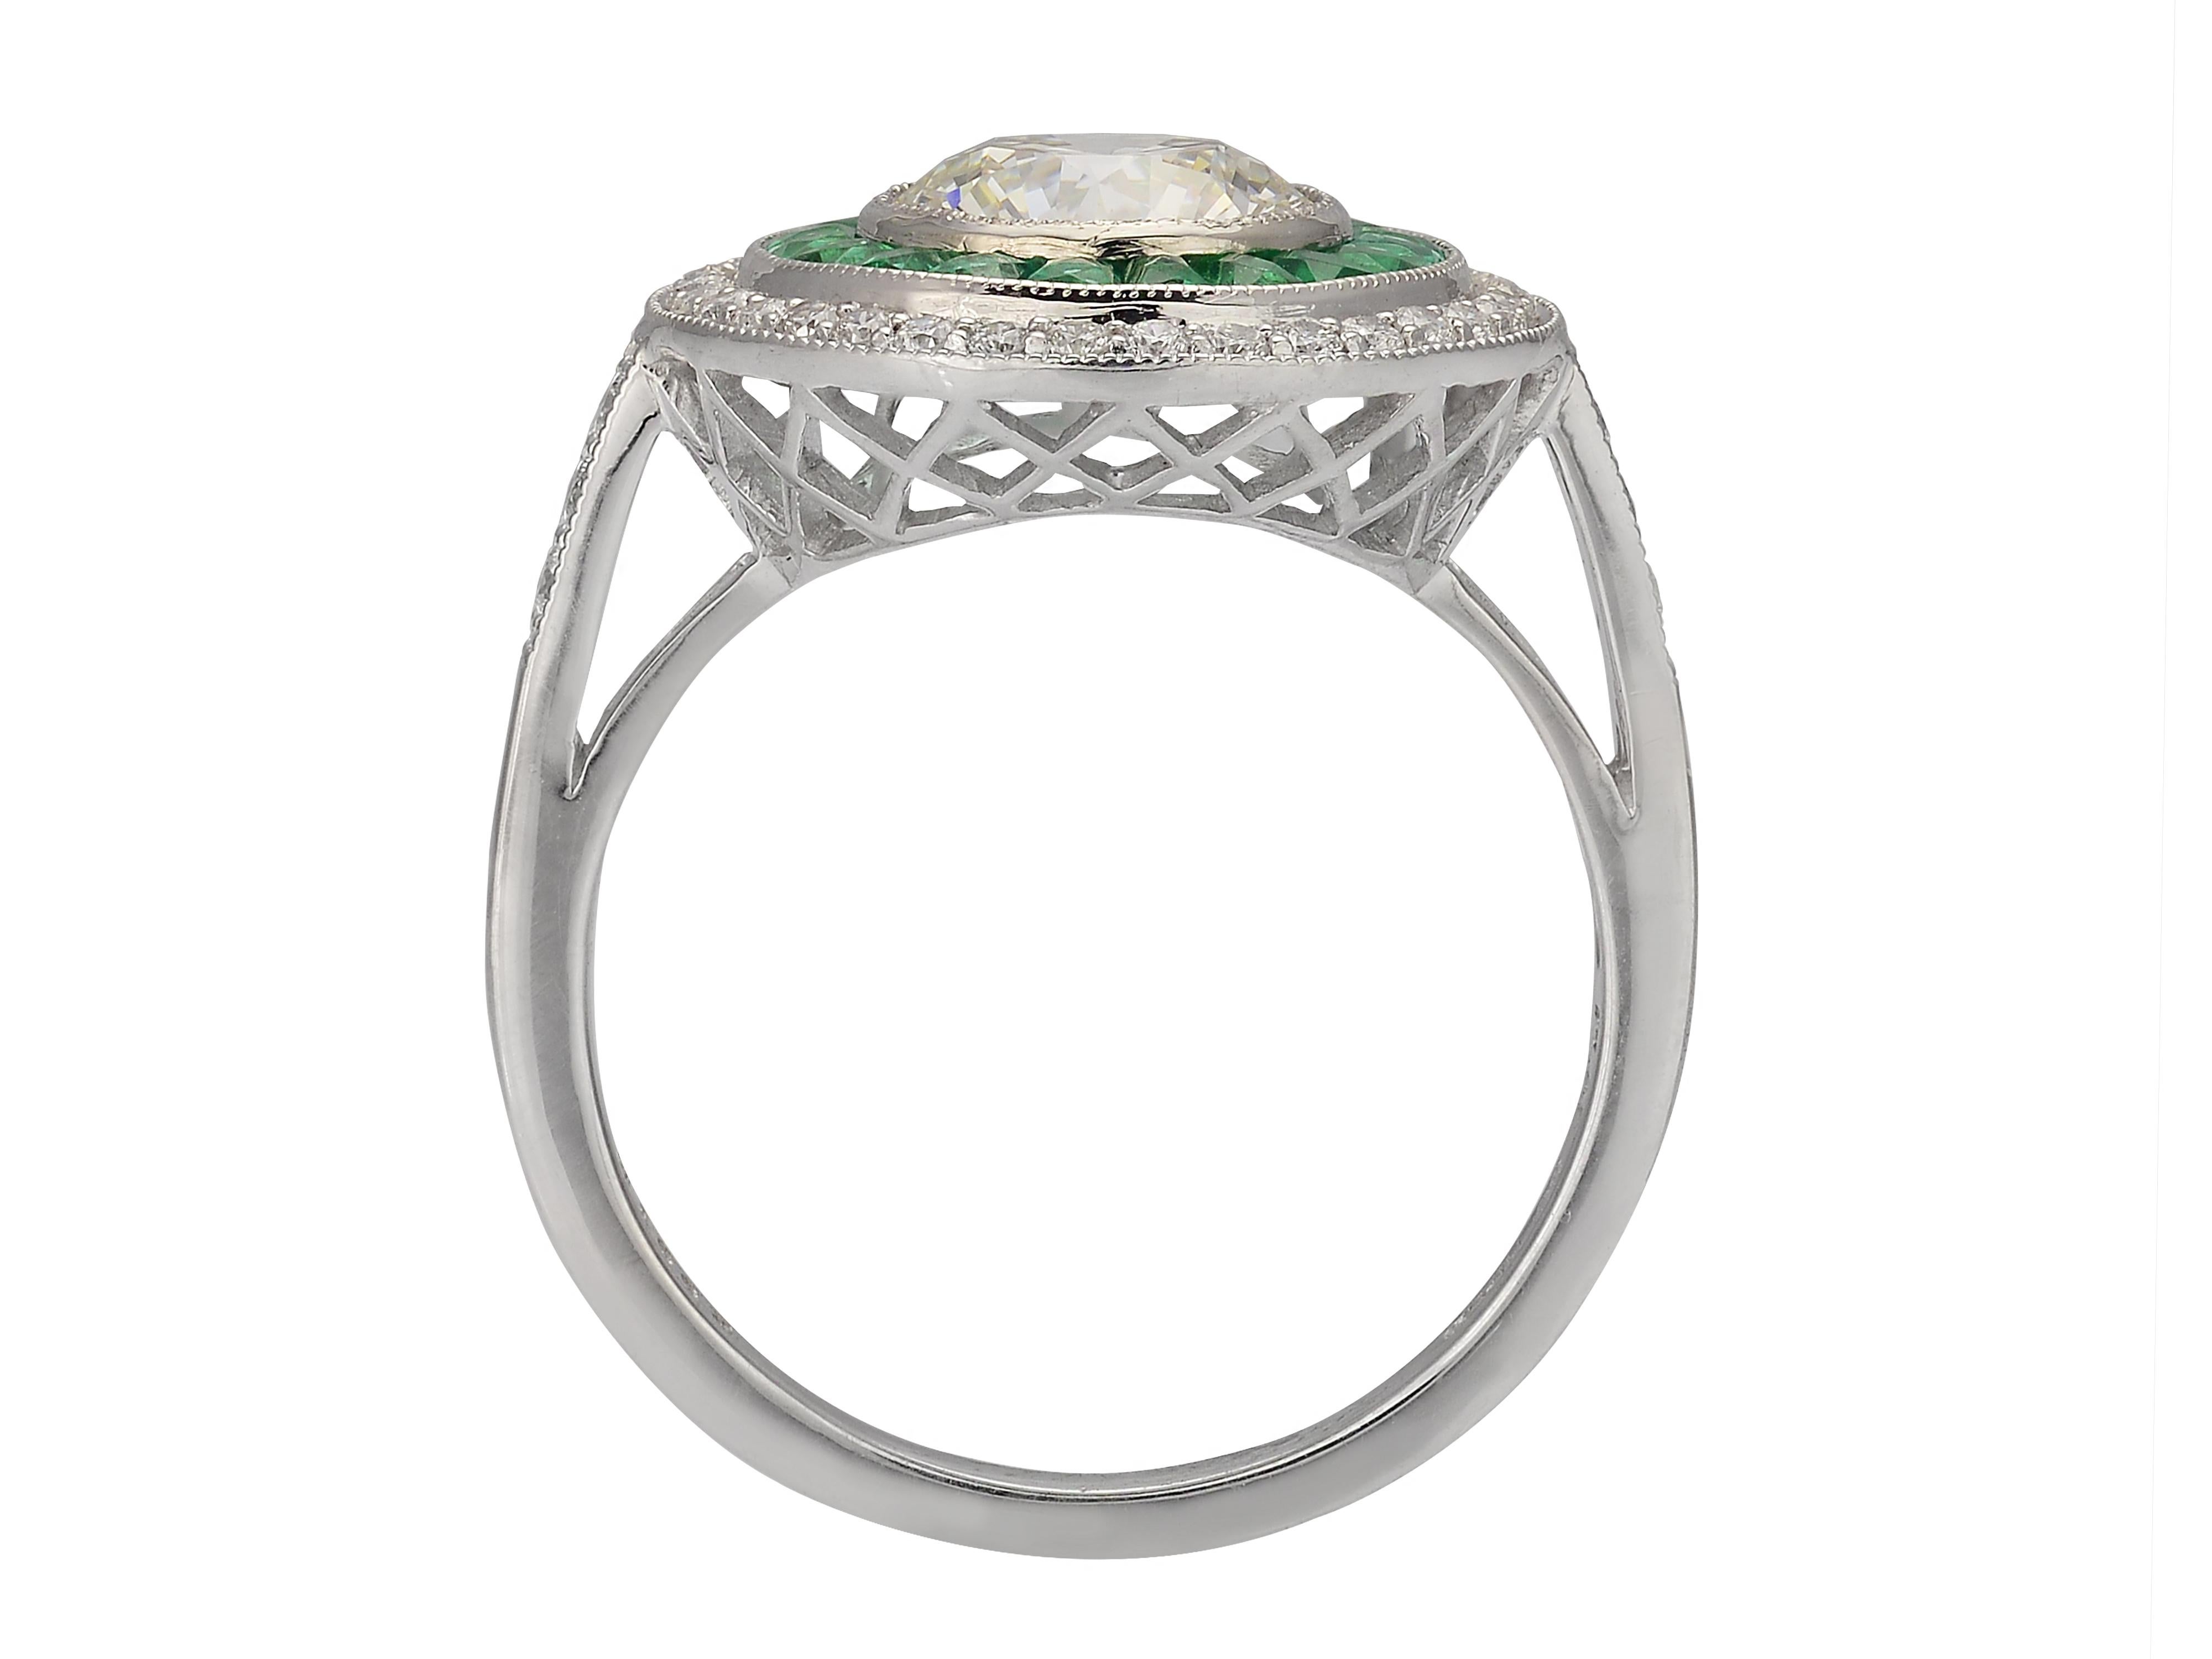 Round Cut Vintage Inspired Emerald and Diamond Ring